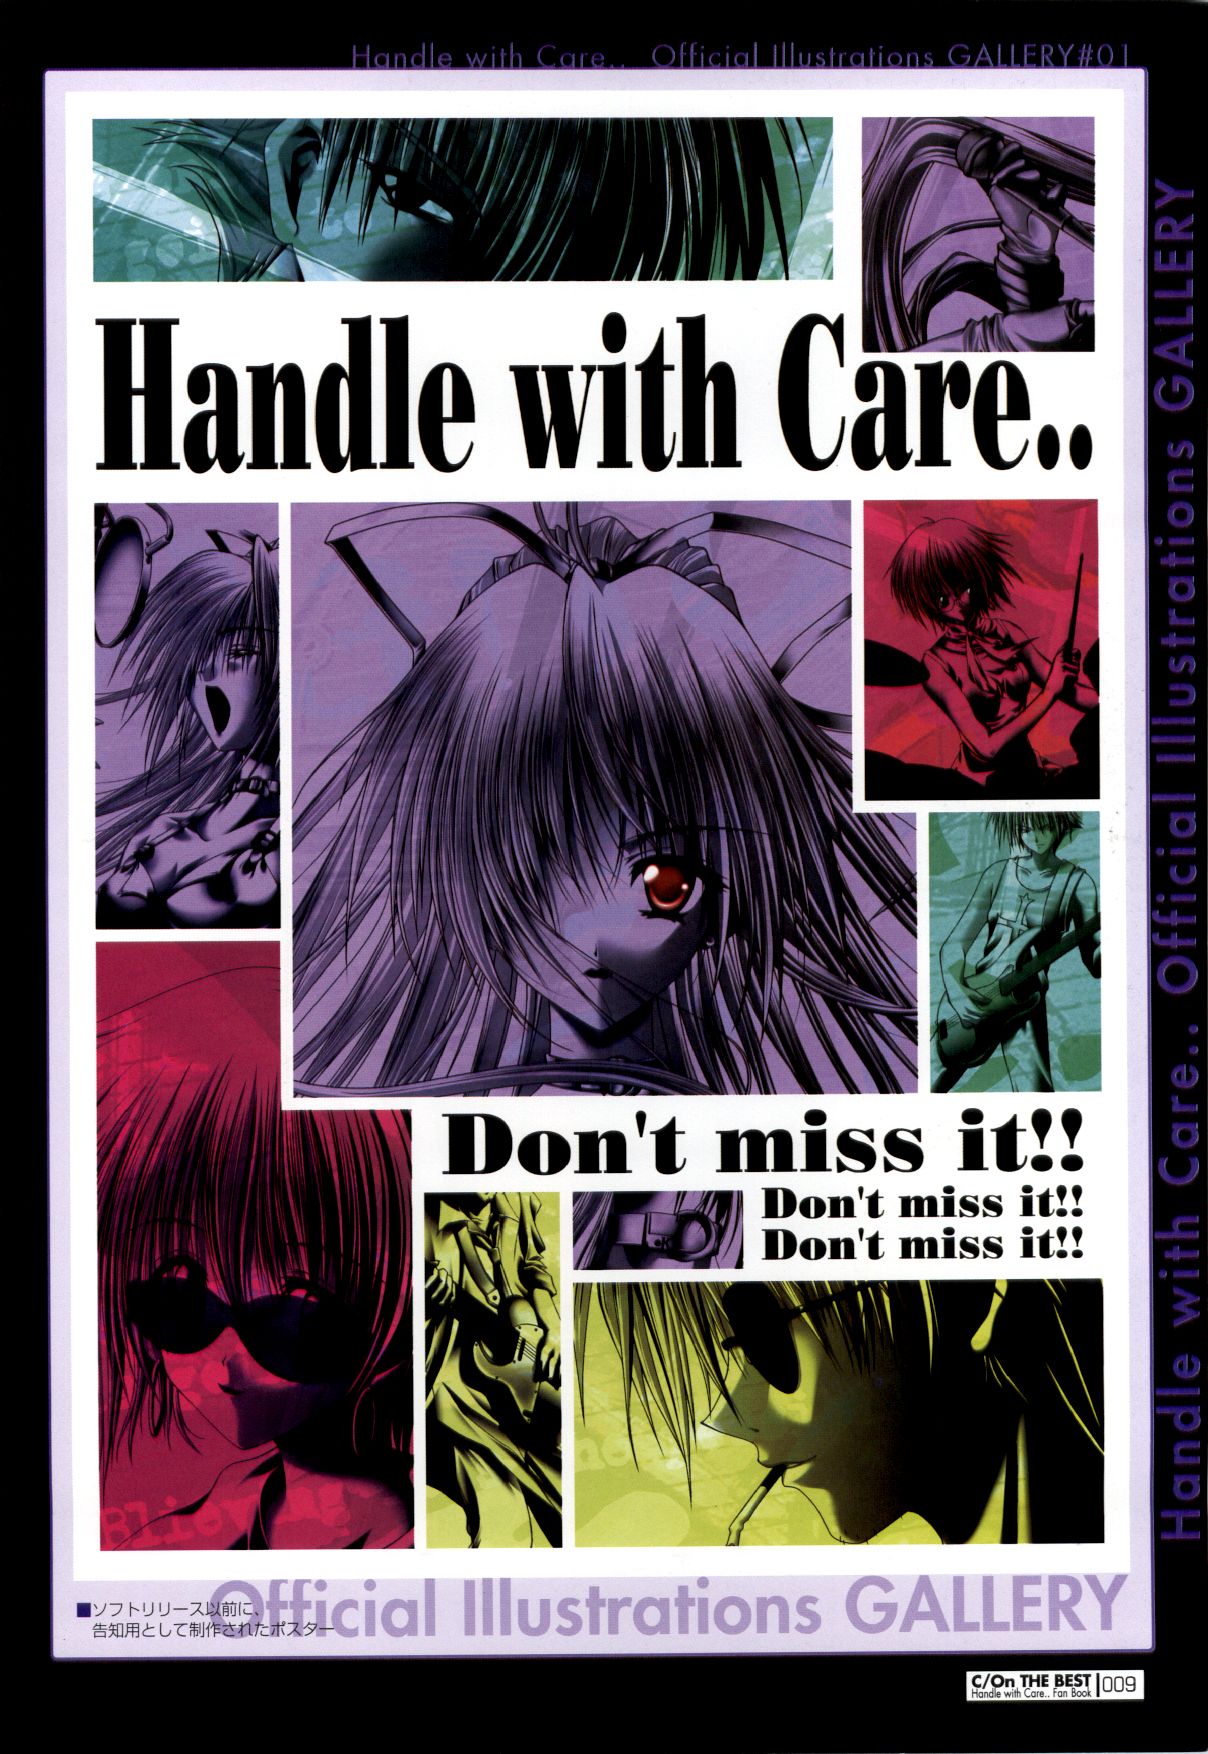 [ETOILE] C/On THE BEST Handle with Care... OFFICIAL FAN BOOK